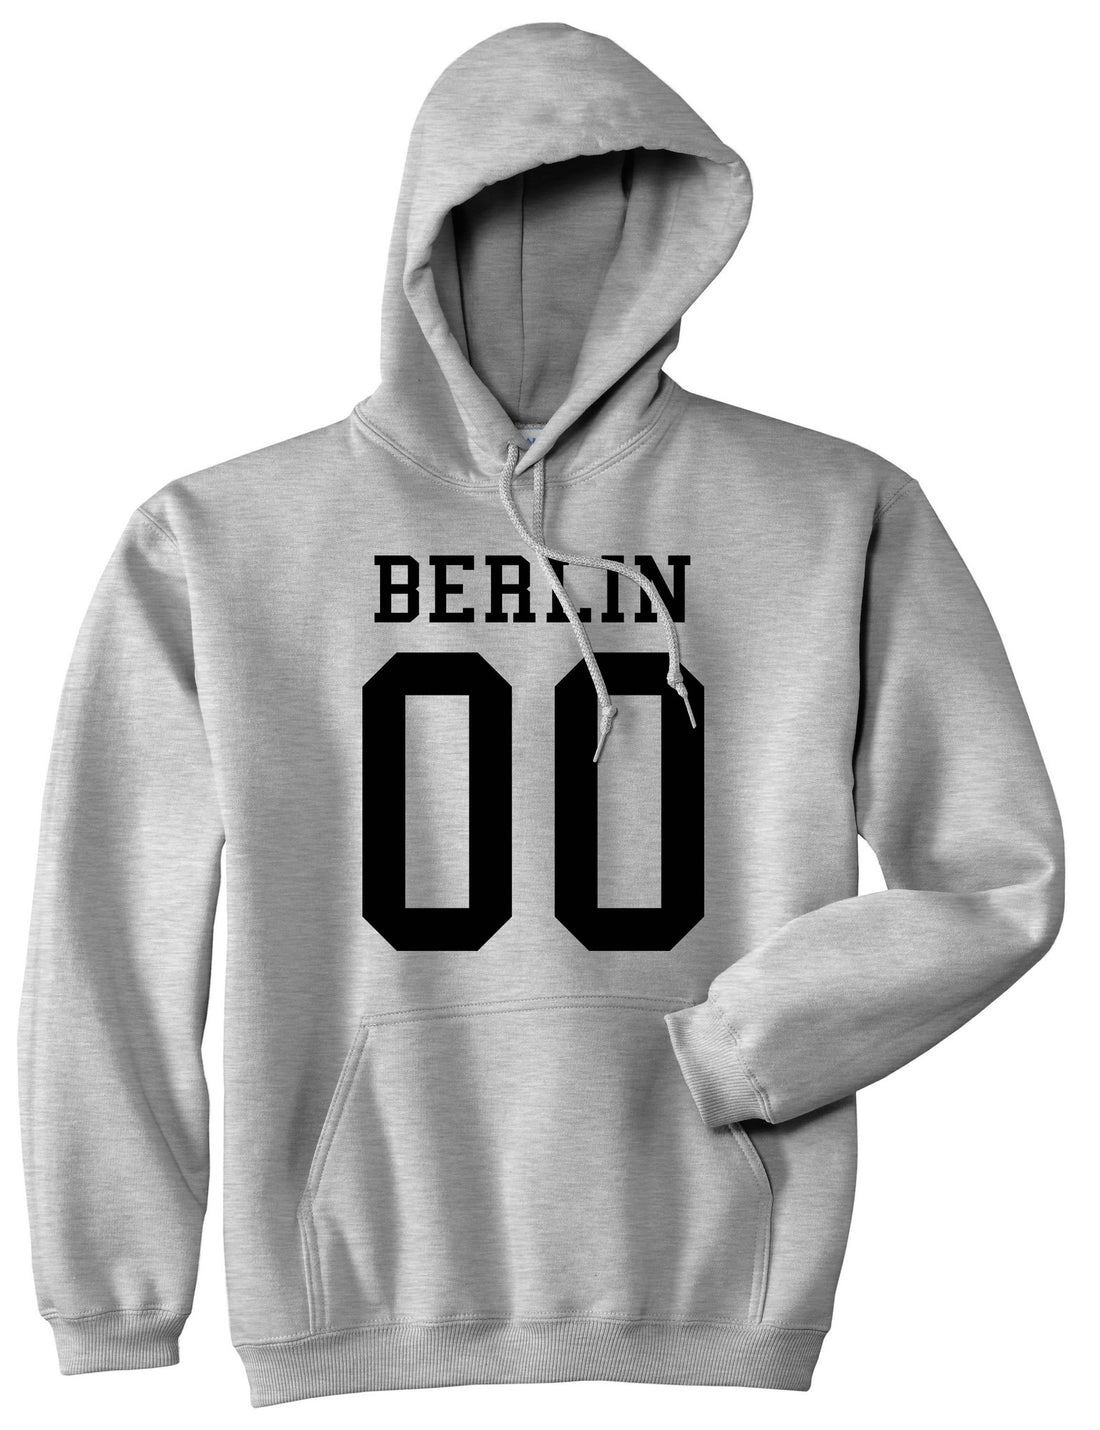 Berlin Team Jersey Germany Country Pullover Hoodie in Grey By Kings Of NY